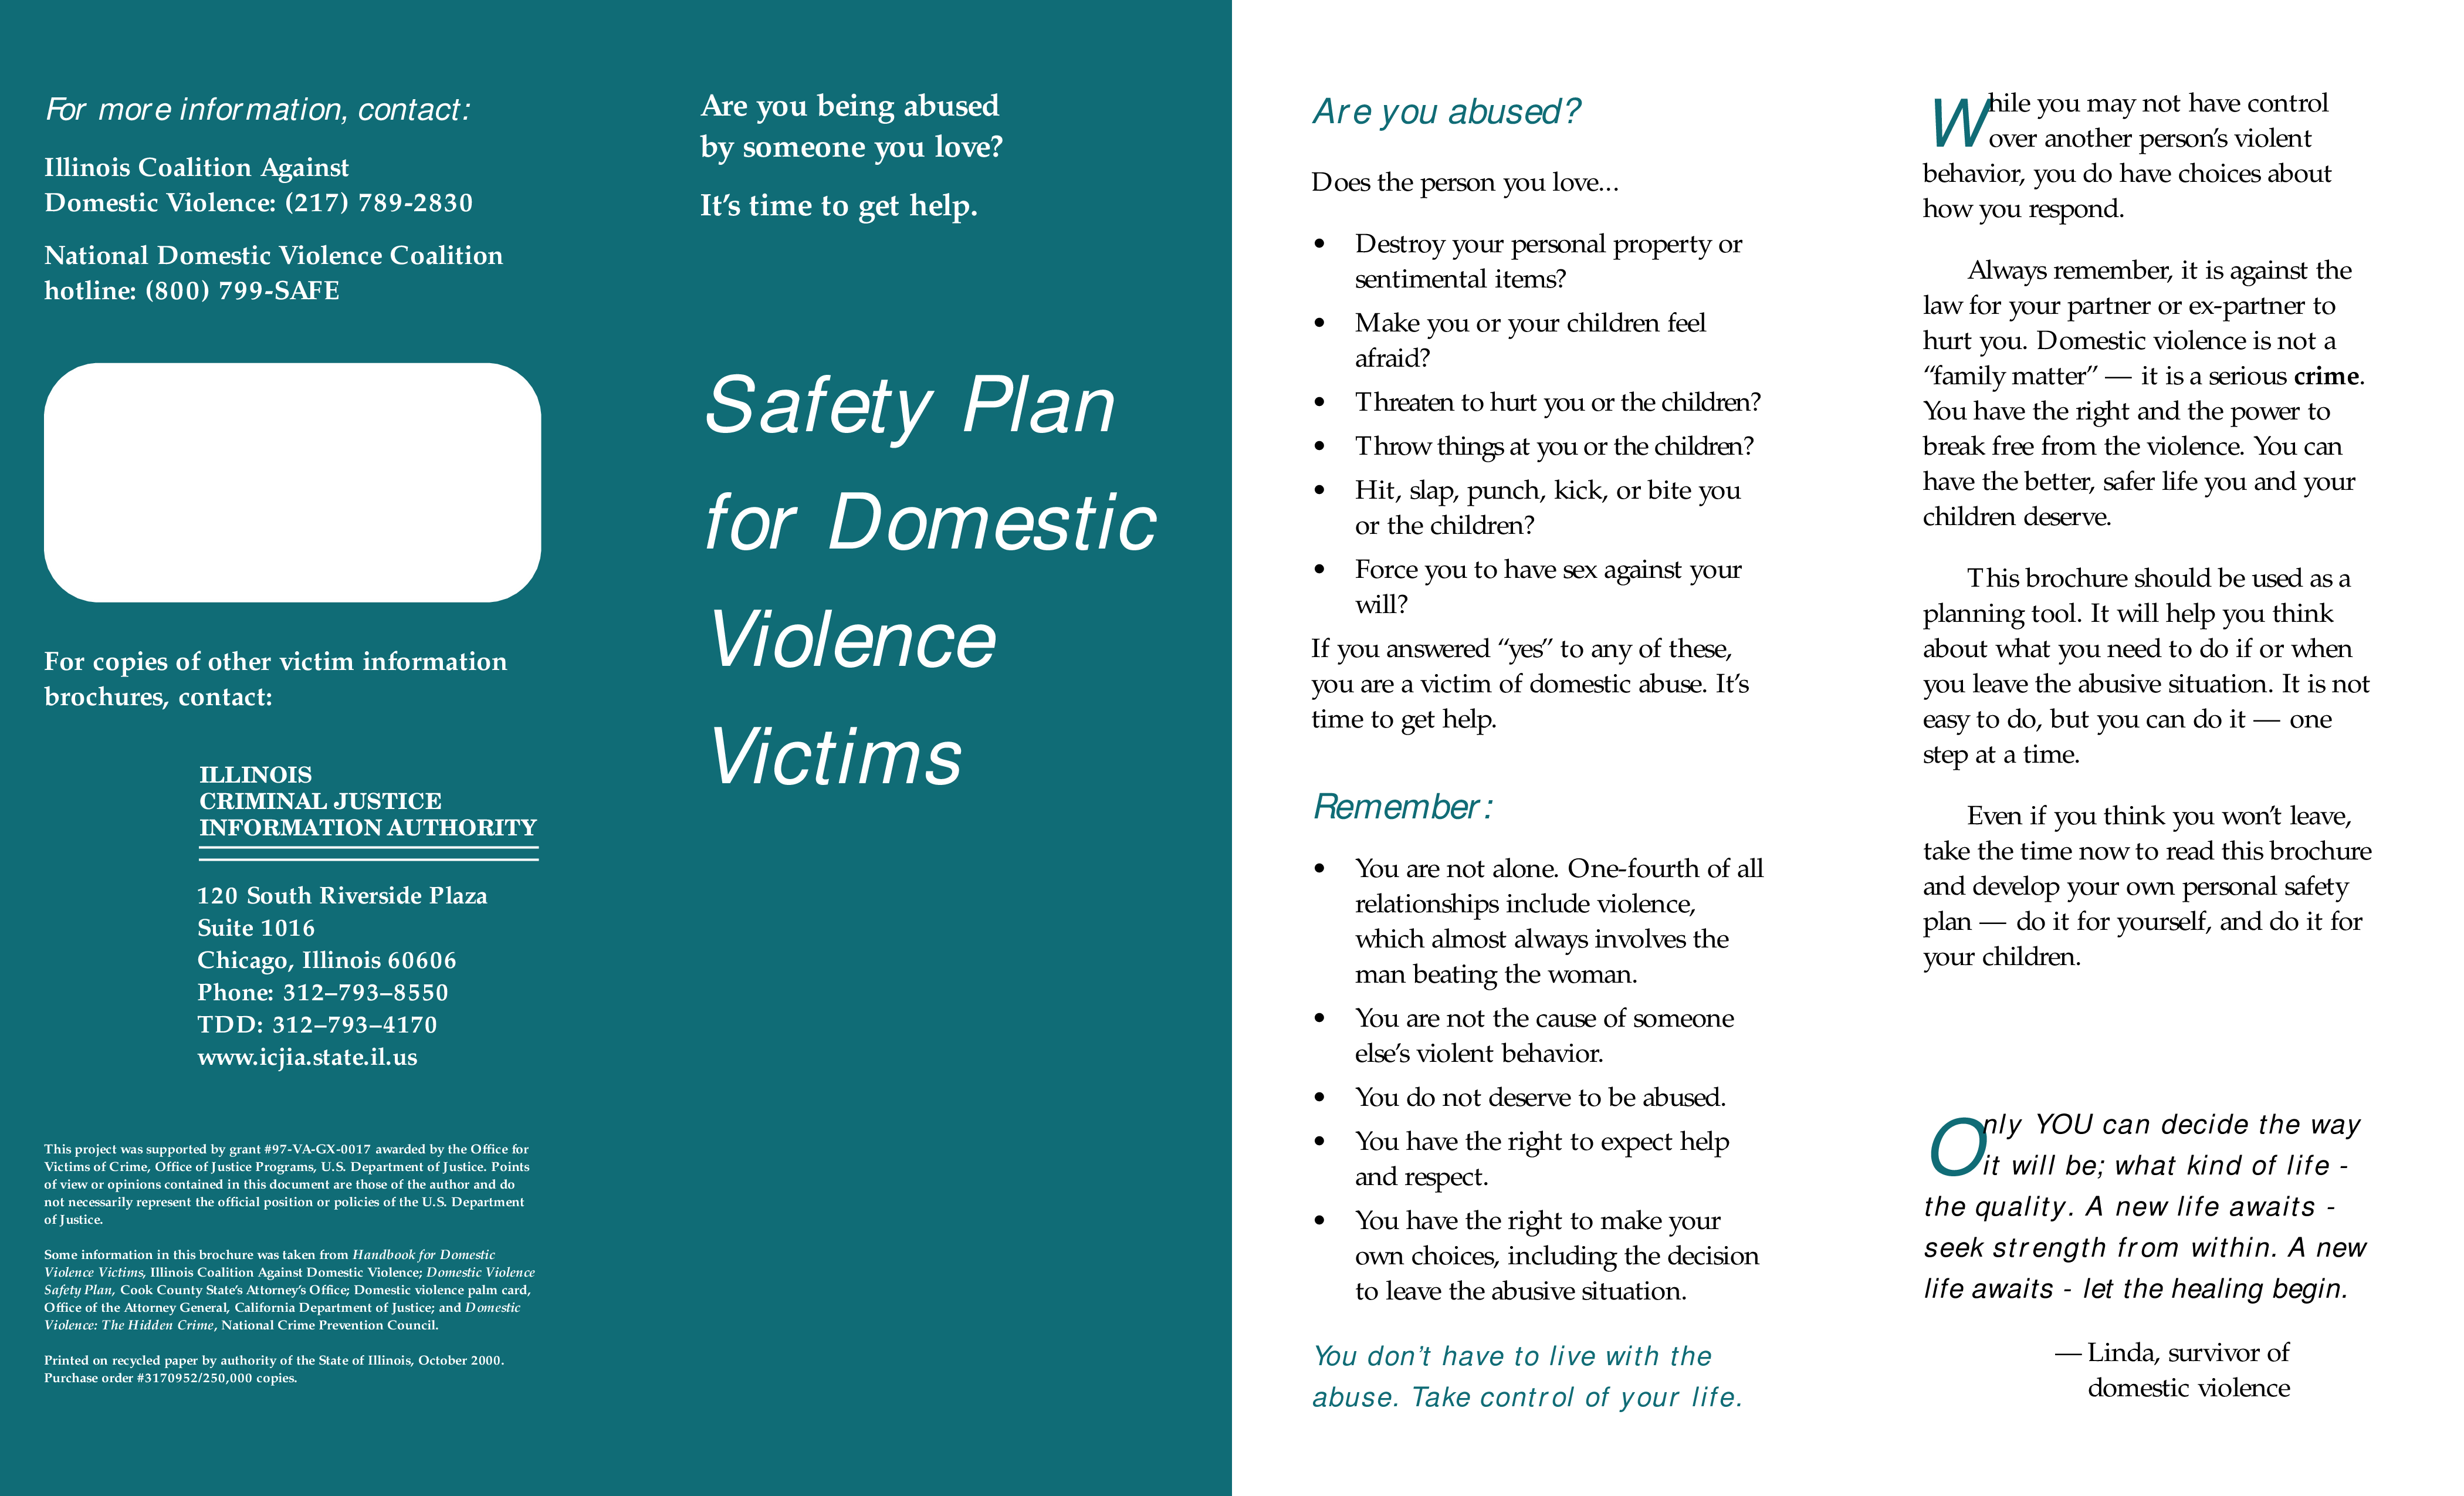 Domestic Violence Safety Plan Brochure Templates at